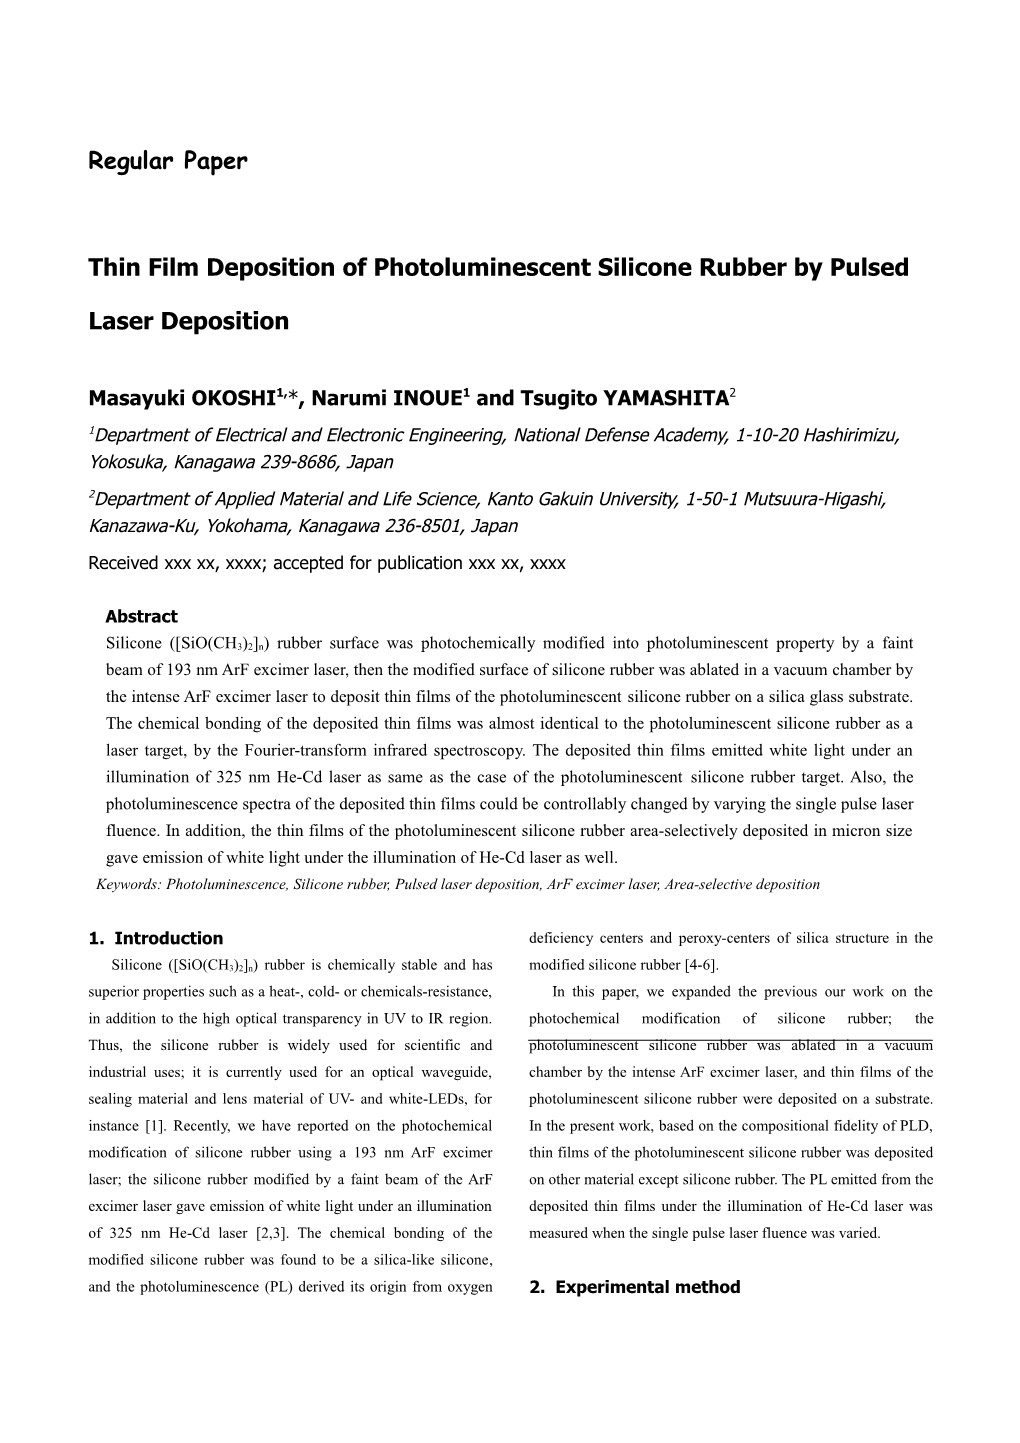 Thin Film Deposition of Photoluminescent Silicone Rubberby Pulsed Laser Deposition